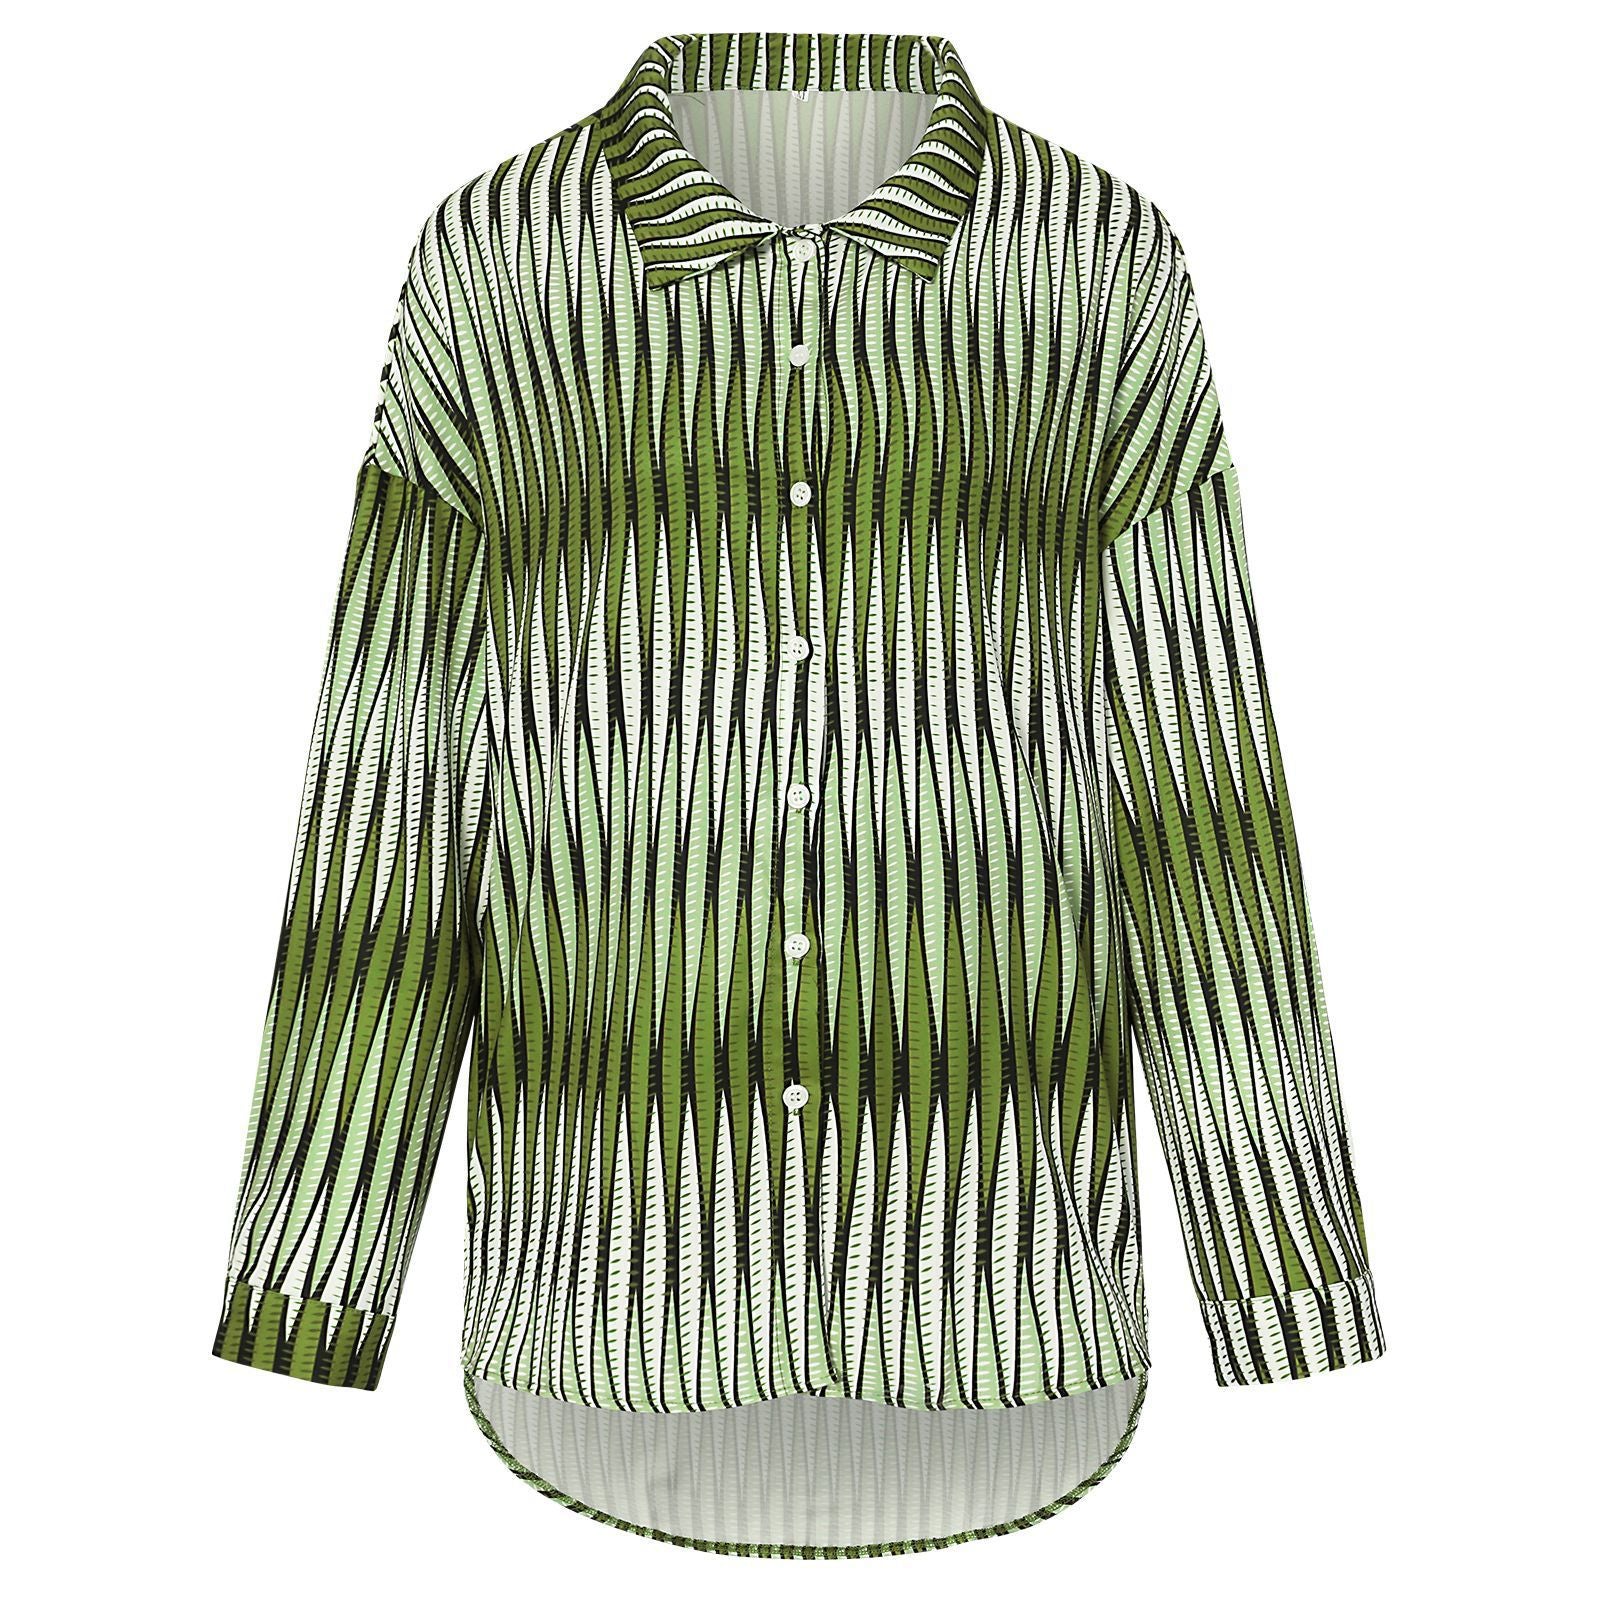 Early Autumn New Cardigan Top Women's Lapel Long-Sleeved Striped Shirt